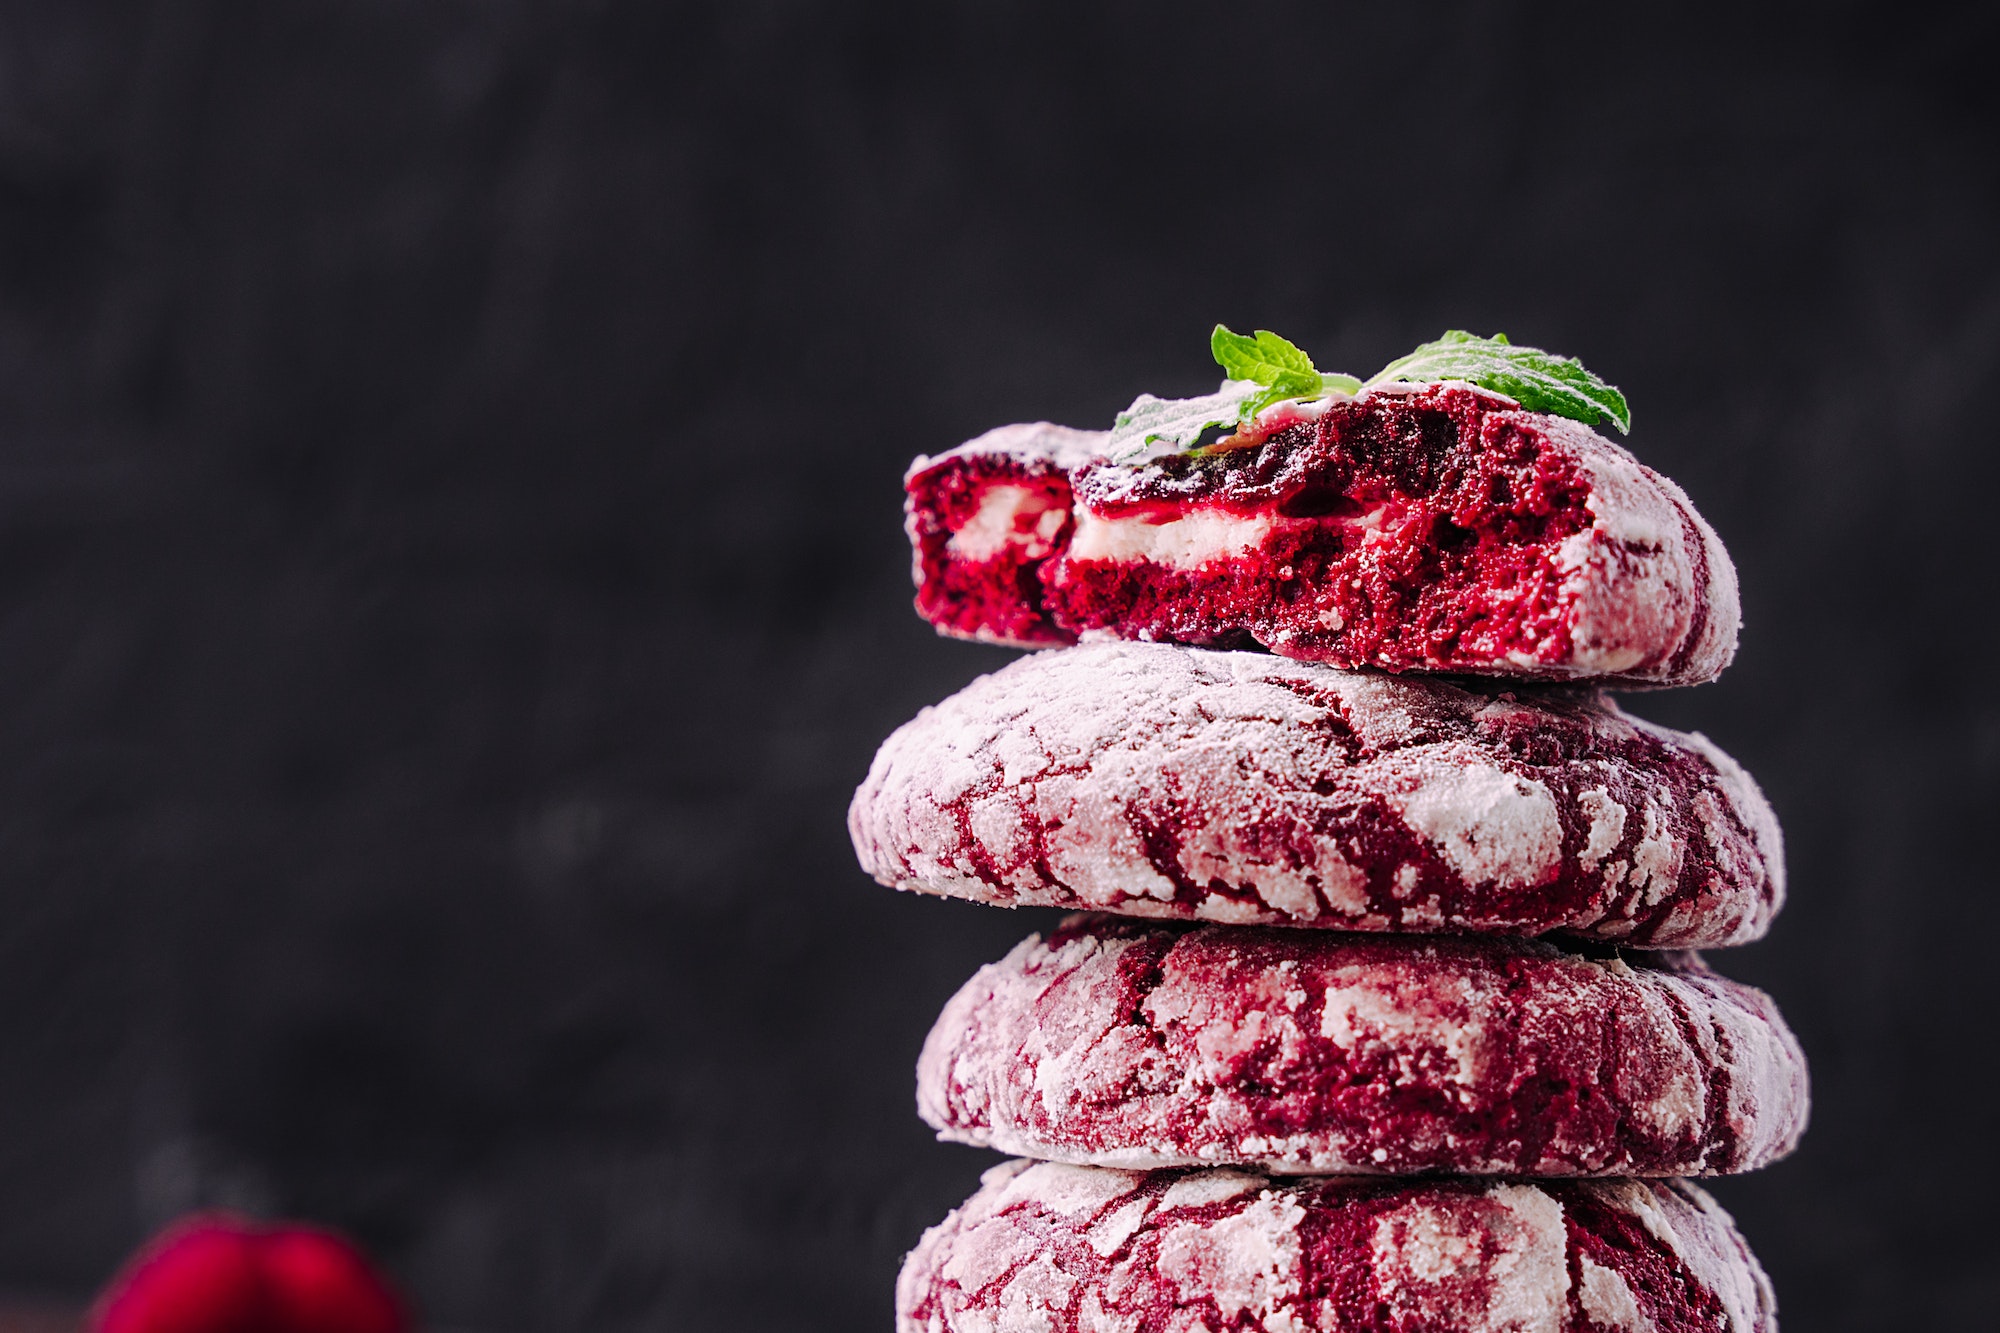 Stack or tower of cookies. Red velvet cookies close up